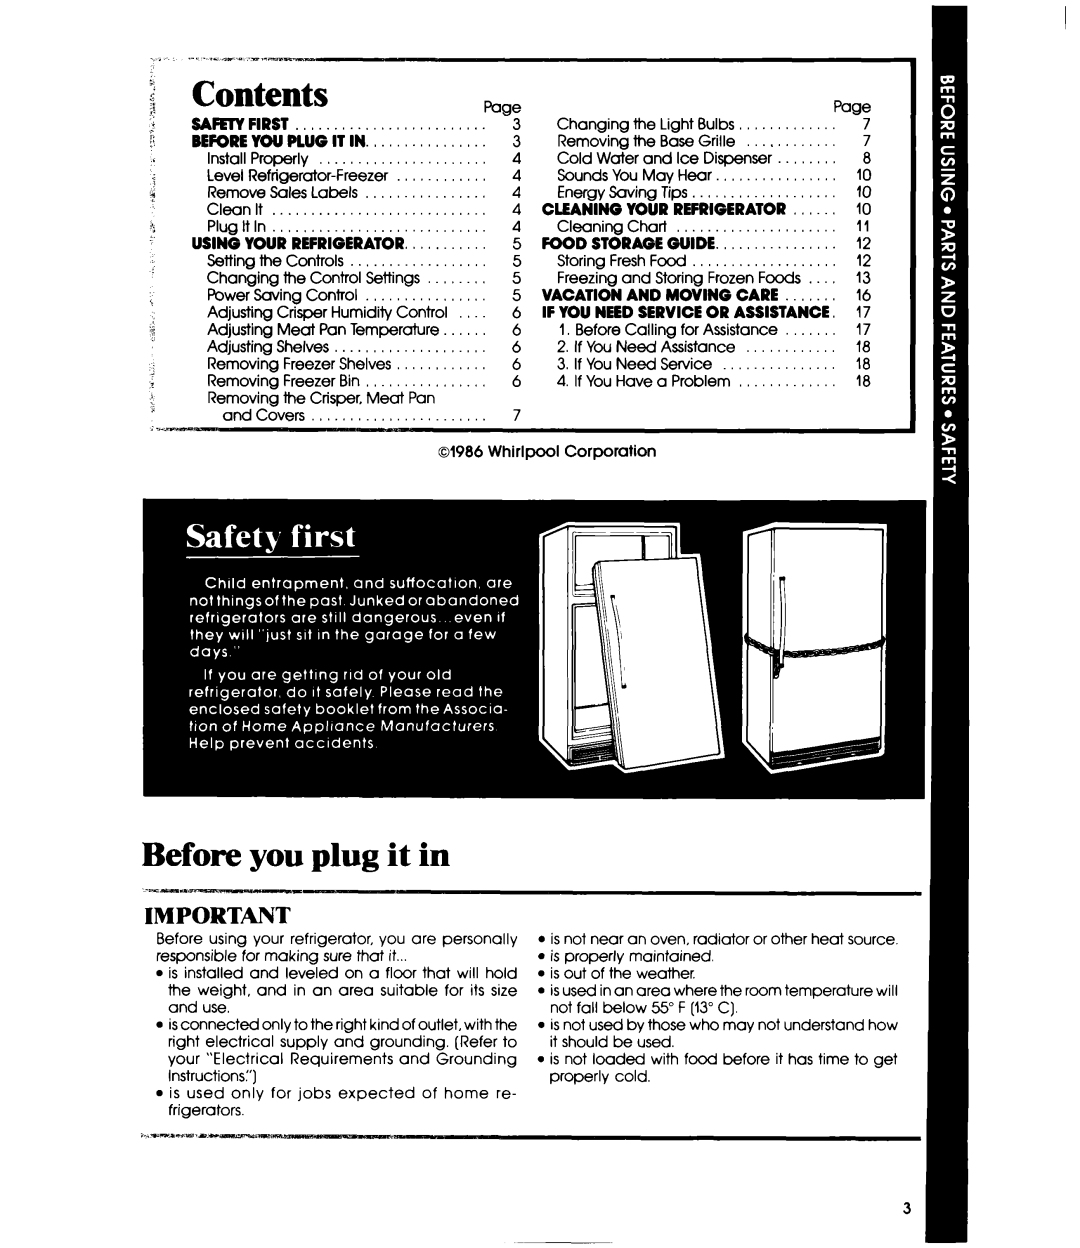 Whirlpool ED22EM manual Safetyfirst, Using Your Refrigerator, Food Storage Guide, Vacation And Moving Care 